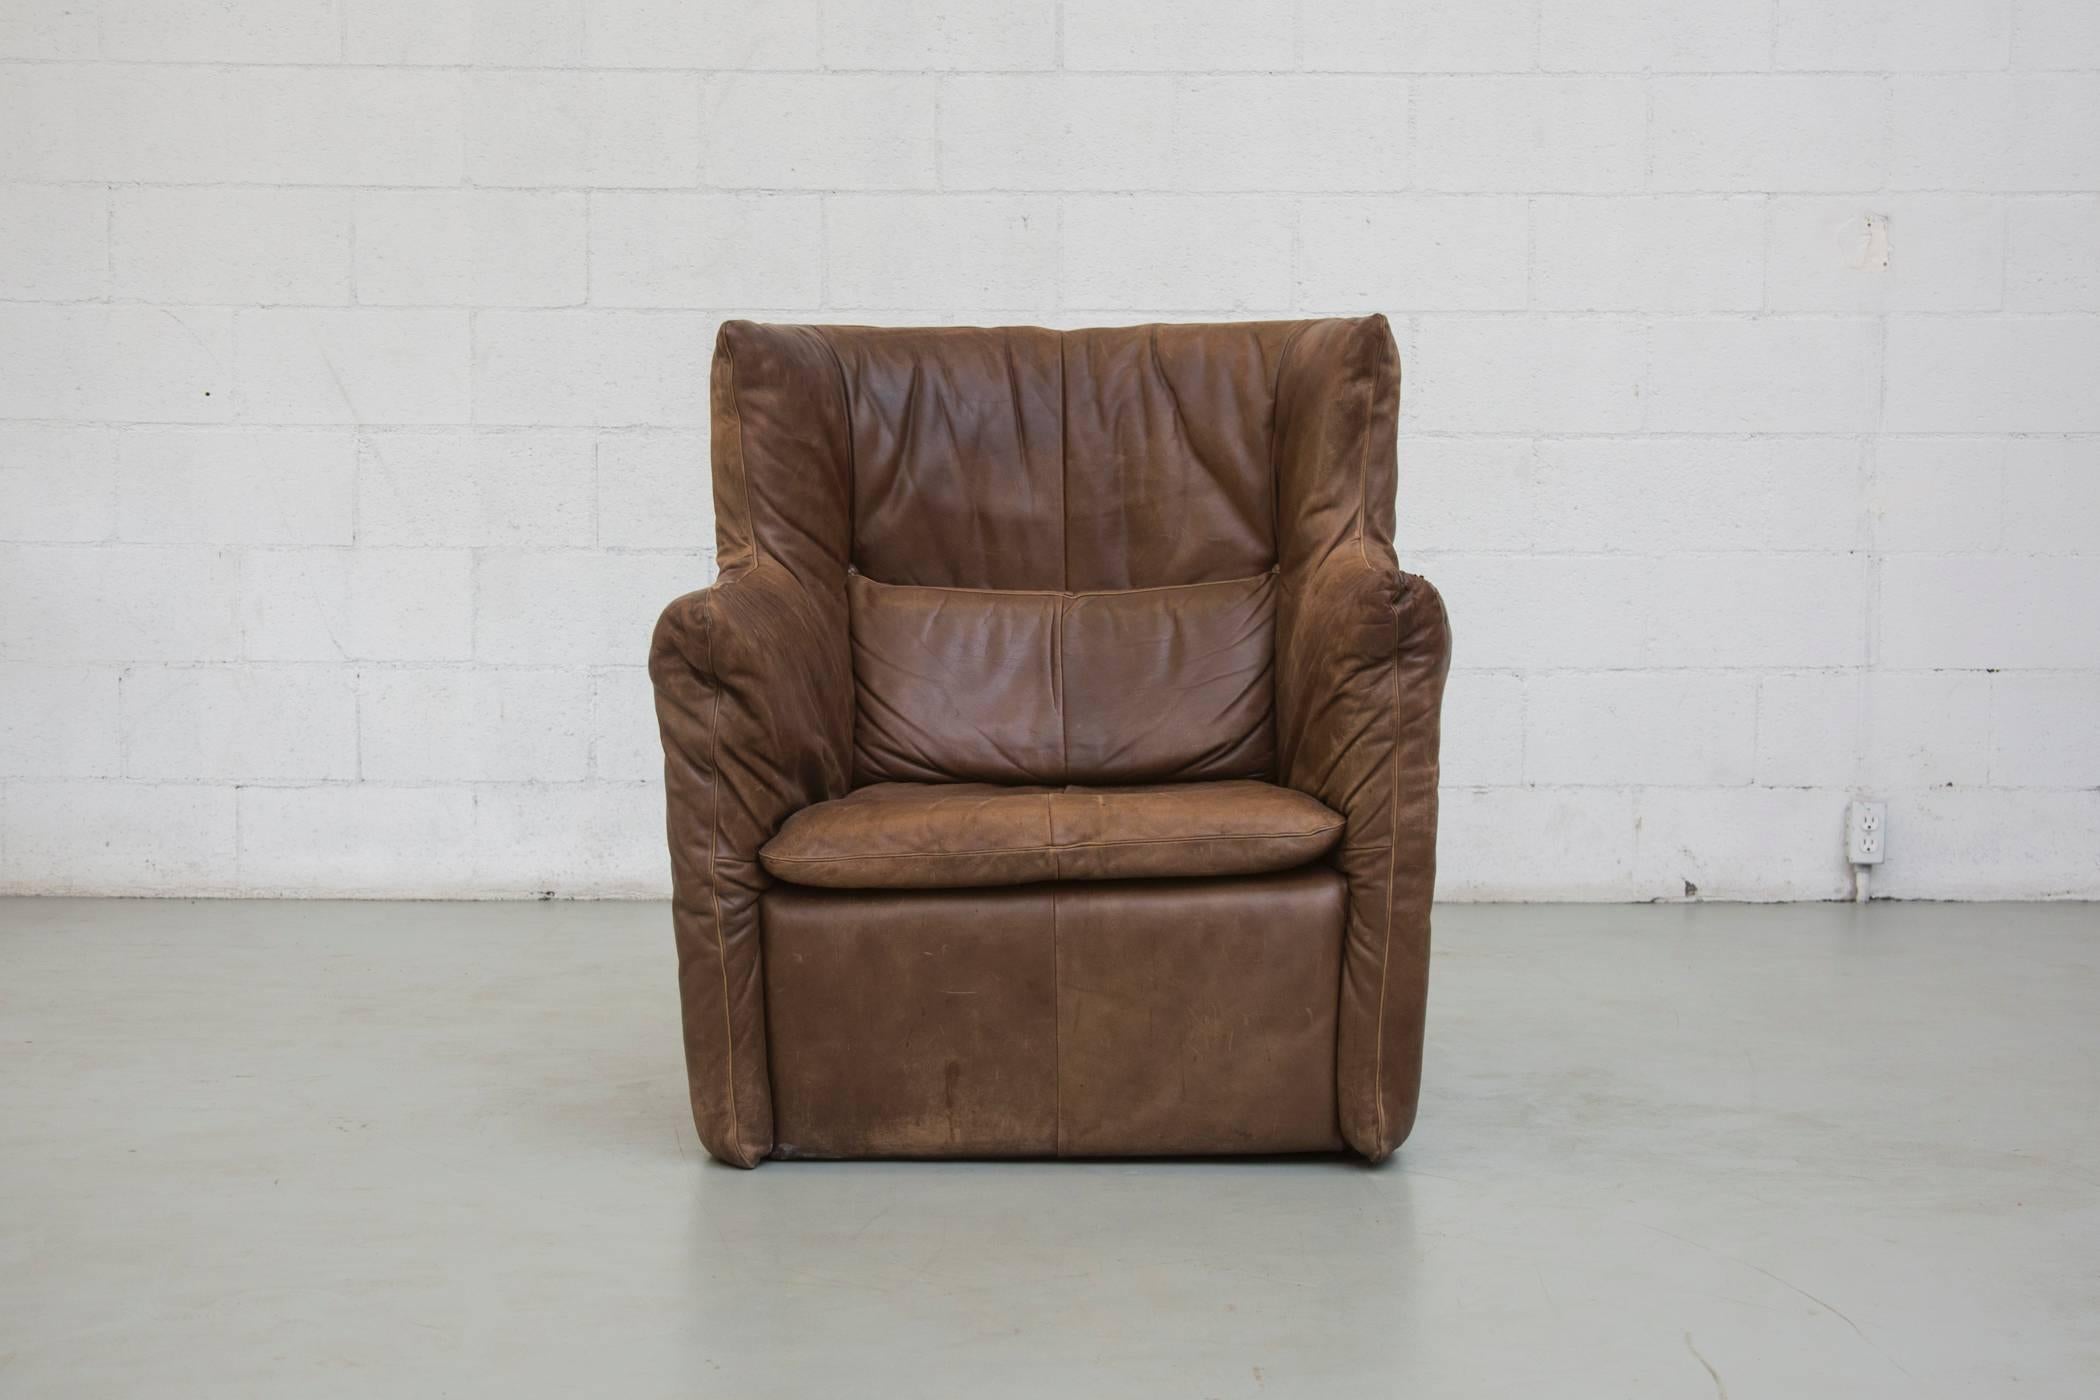 Beautiful single leather lounge chair with beautiful dark brown natural patina. Includes matching back cushion. Minor scratching and markings typical of age and use.